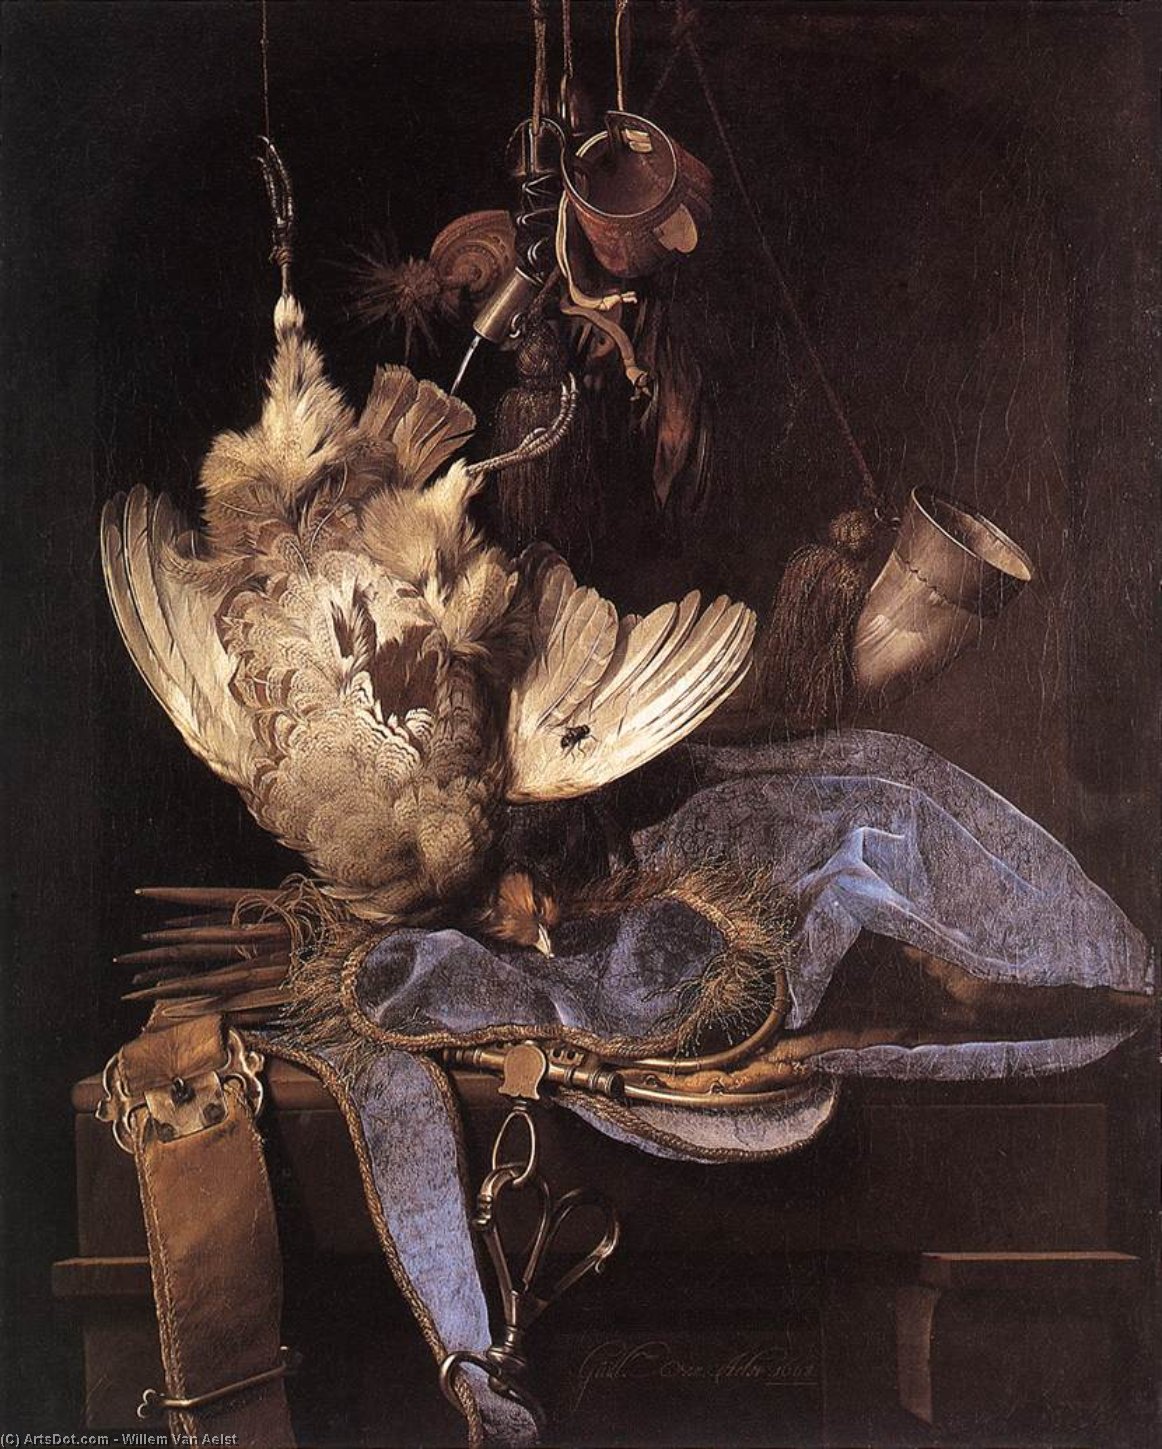 WikiOO.org - 백과 사전 - 회화, 삽화 Willem Van Aelst - Still-Life with Hunting Equipment and Dead Birds